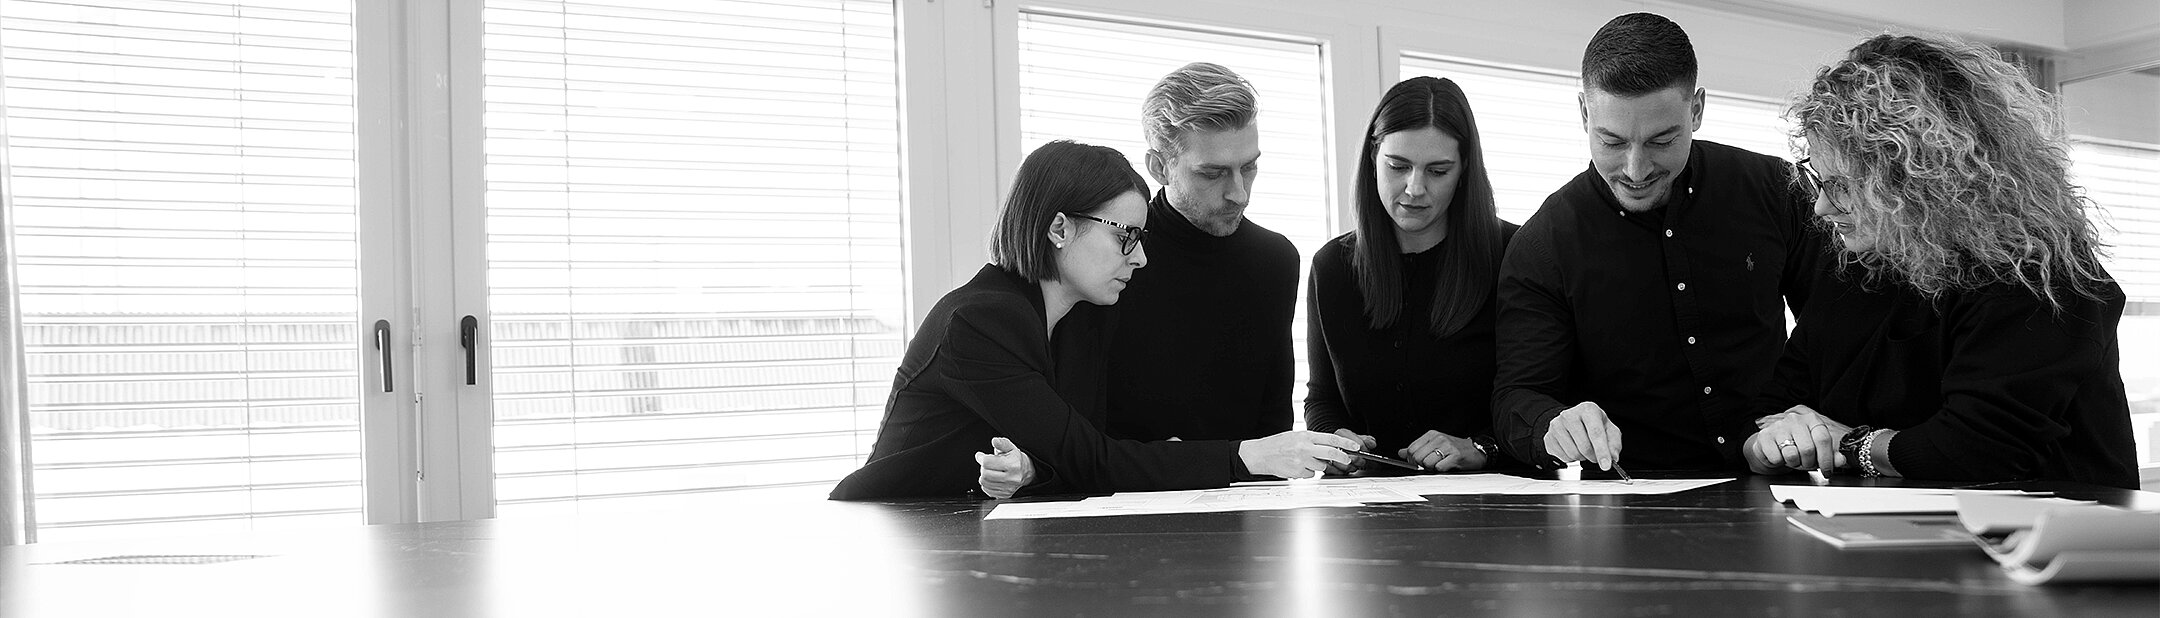 Photograph of three interior designers in black and white discussing a design.